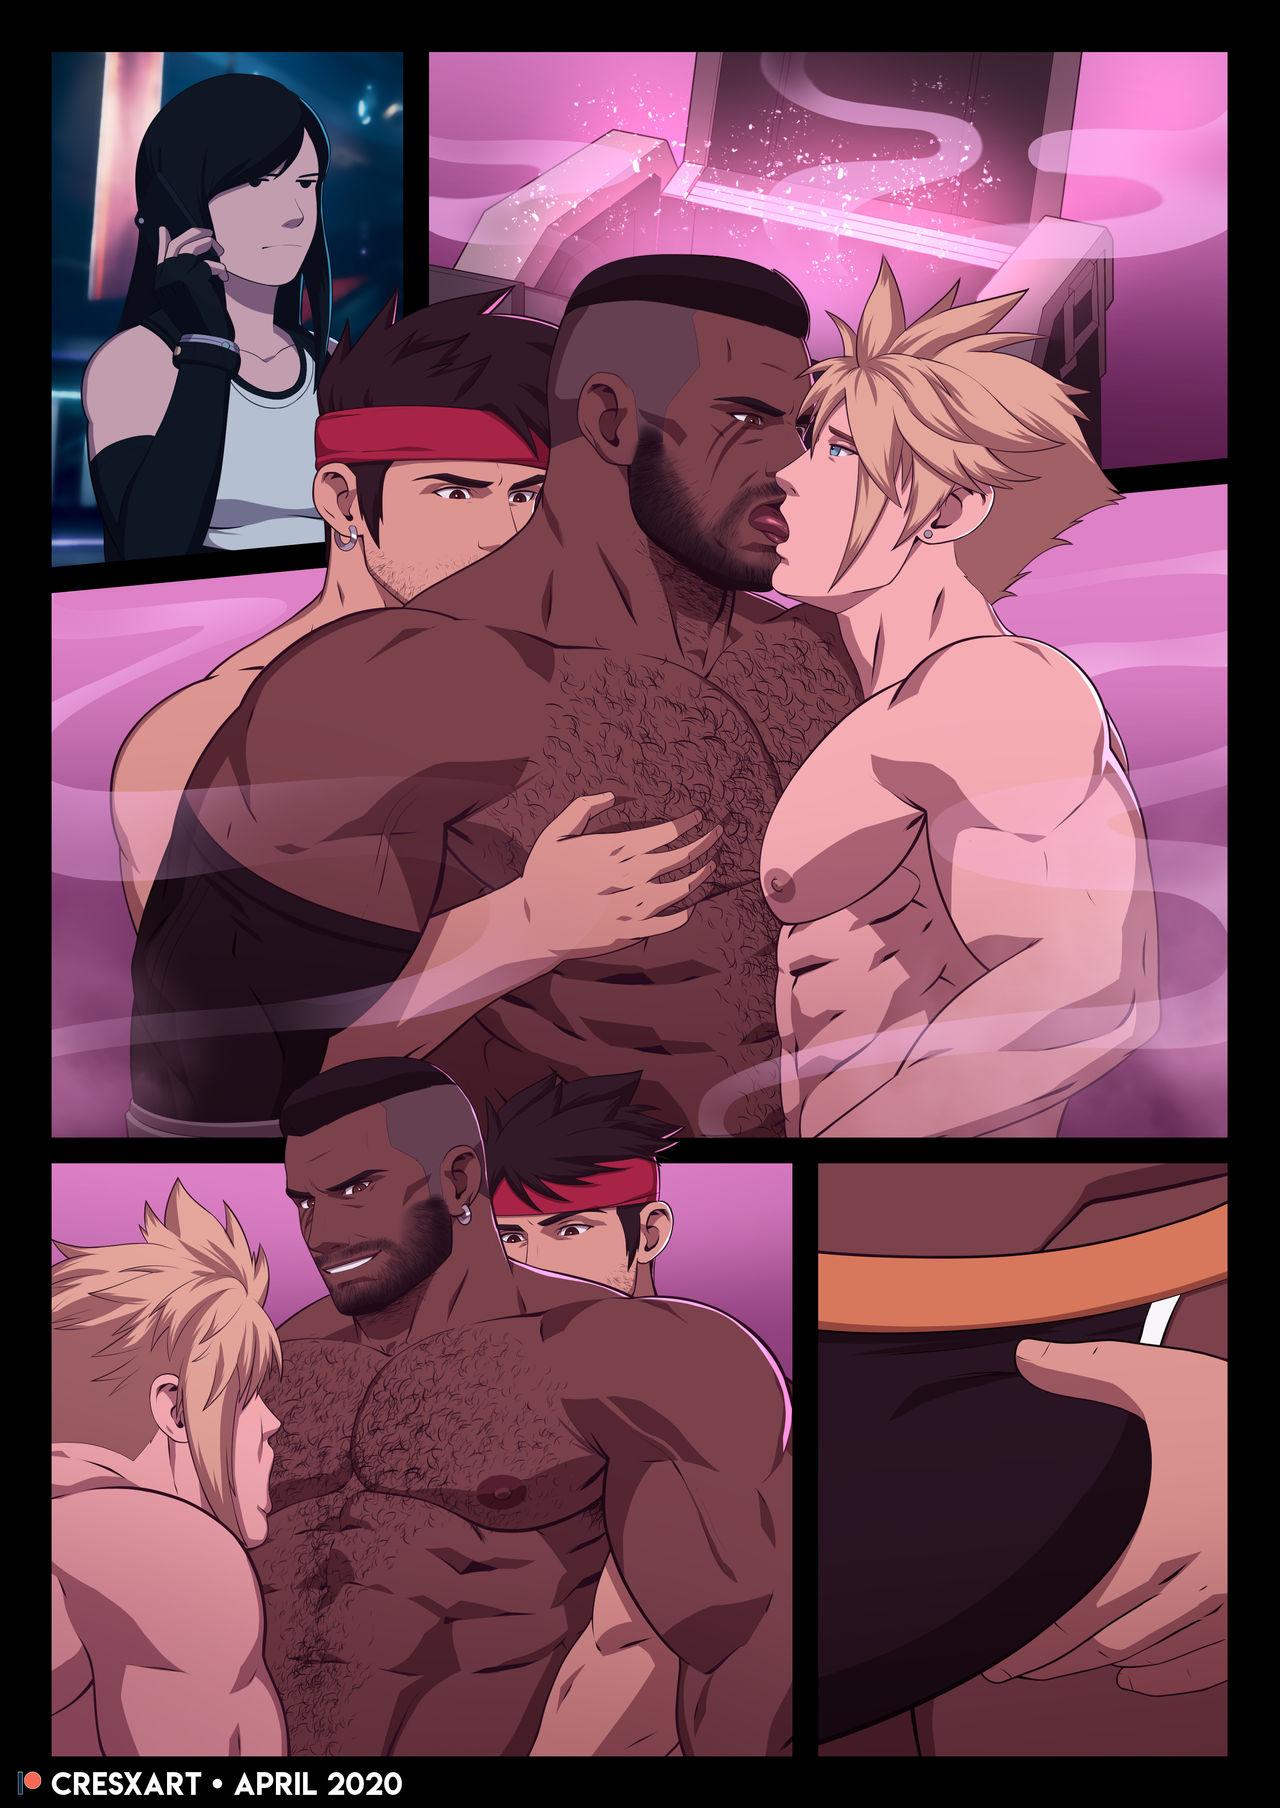 Best Blowjobs Ever Side Quest: FFVII comic - Final fantasy vii Best Blowjob Ever - Page 3